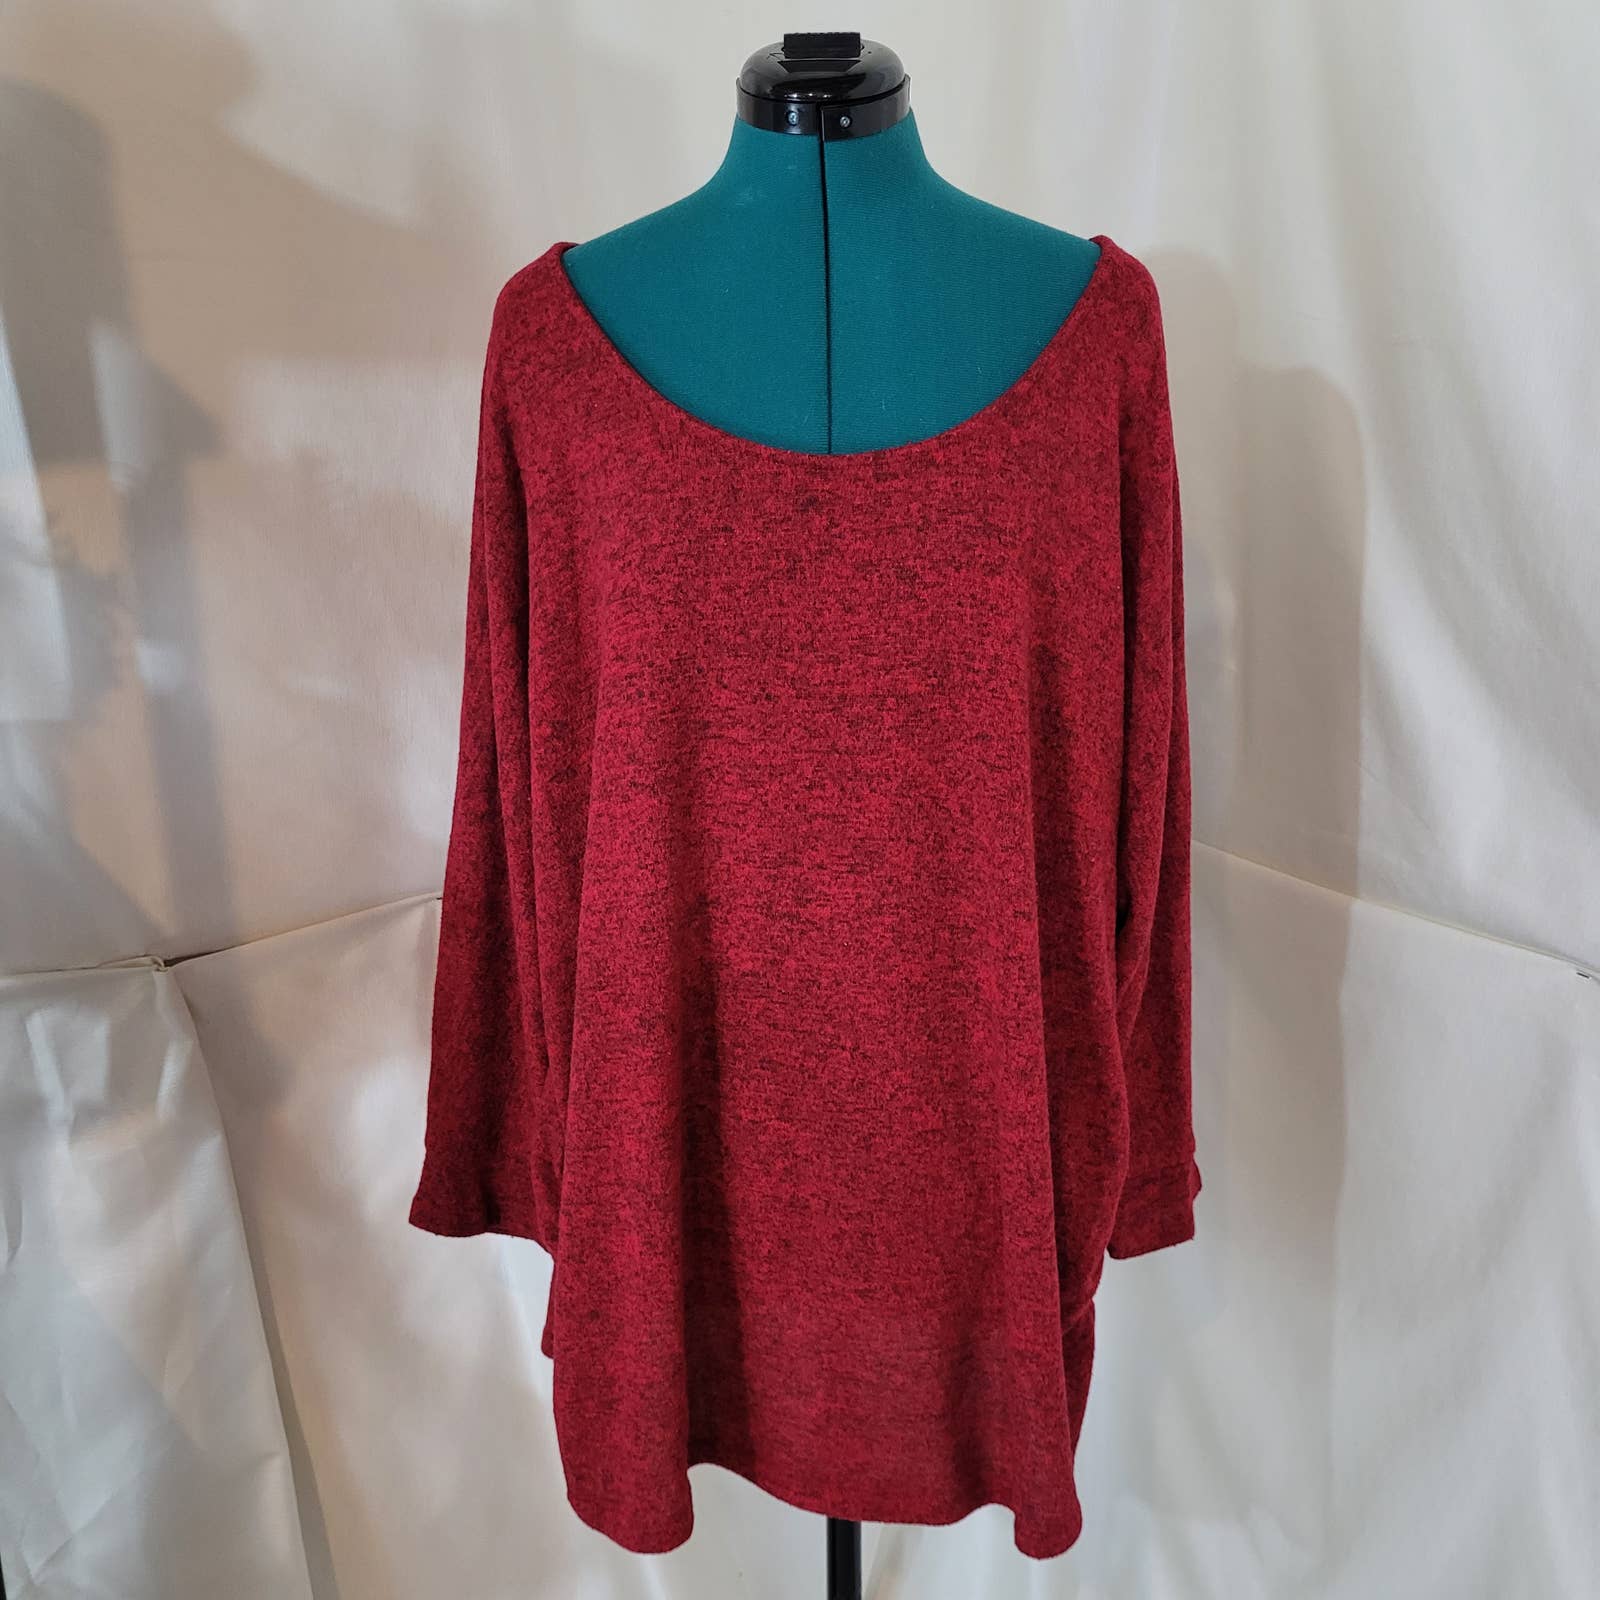 Super Soft Heathered Red Sweater with Criss Croos Back and Rouched Hips - XXLMarkita's ClosetUnbranded